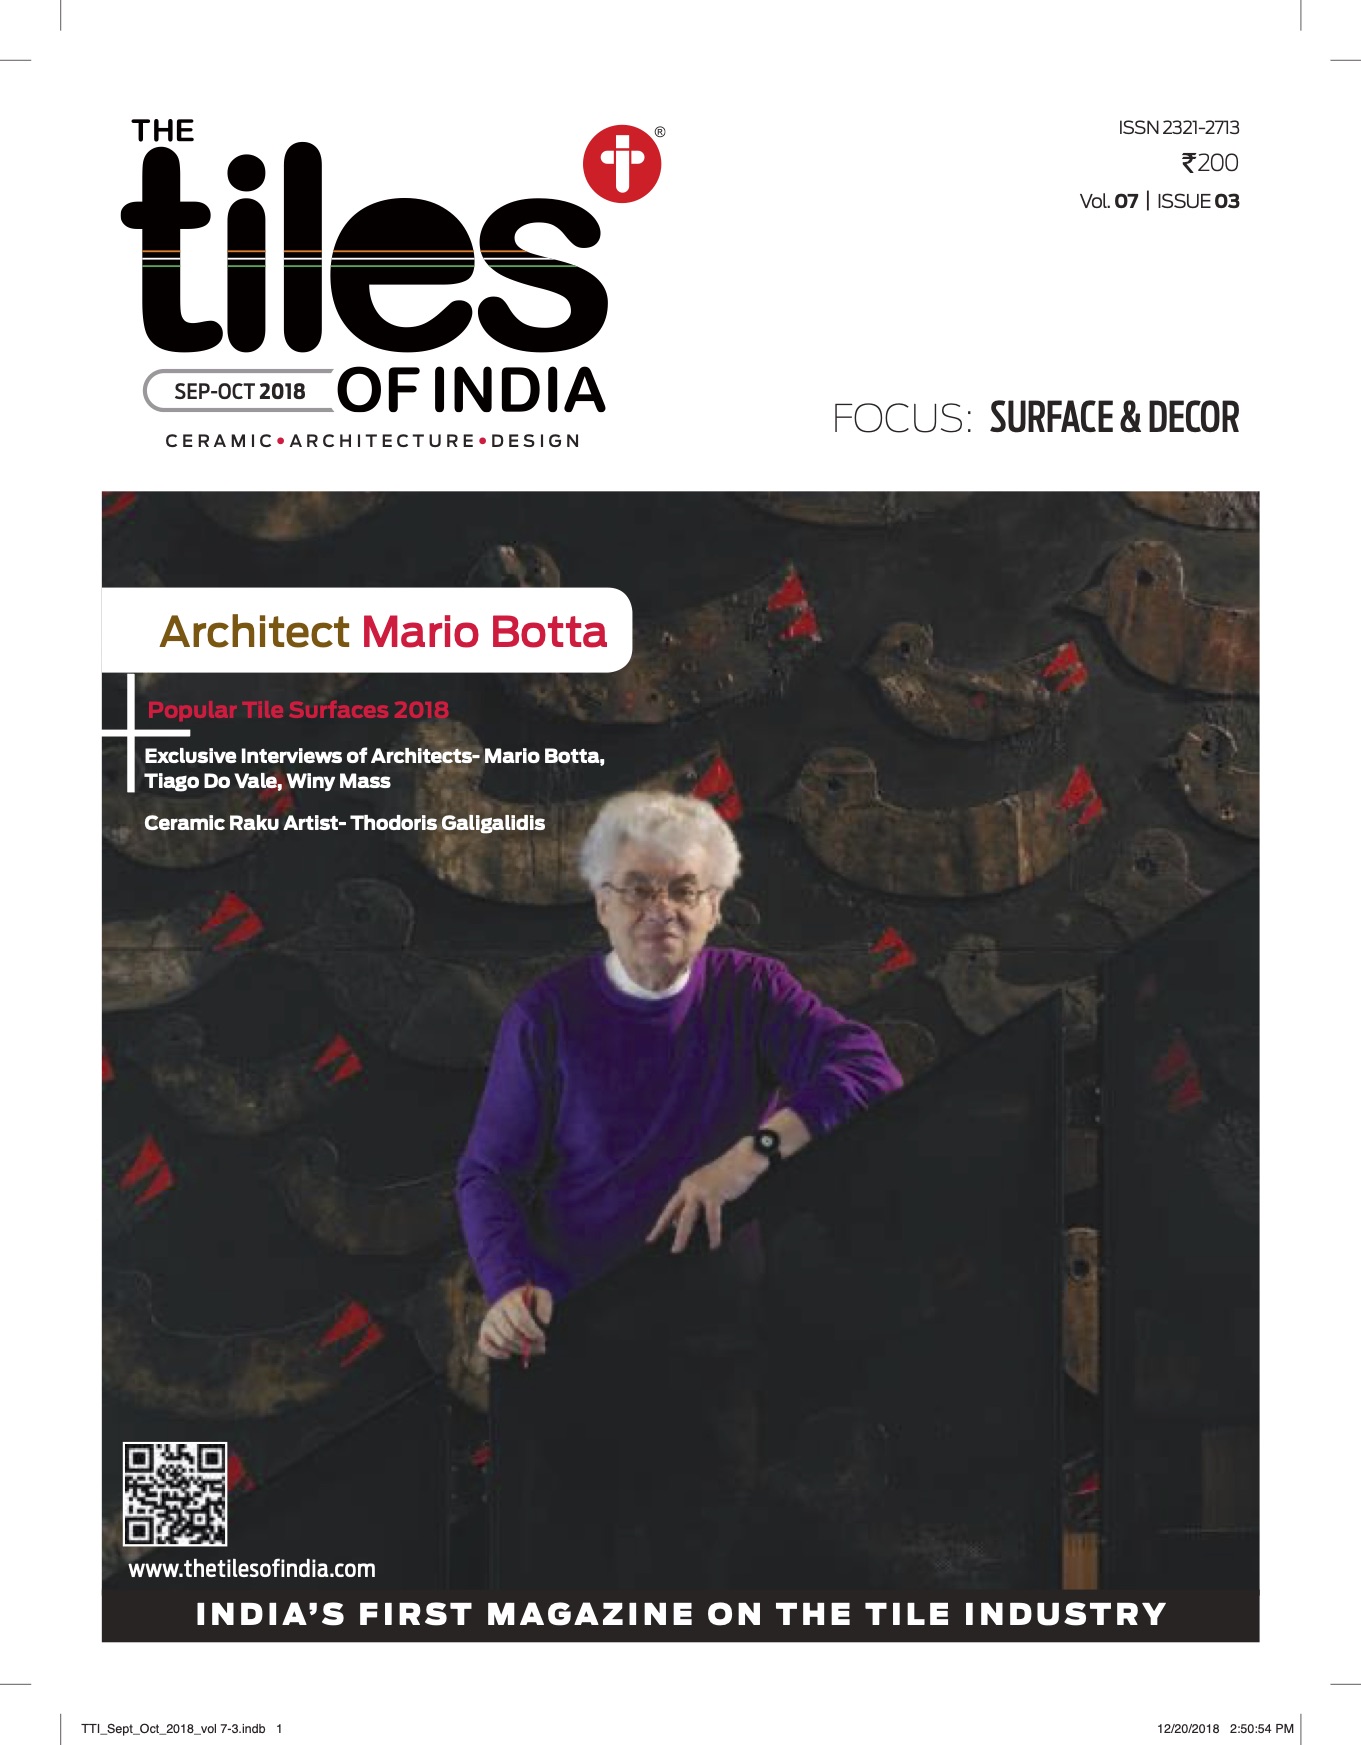 The Tiles of India Magazine - Sep Oct 2018 Issue